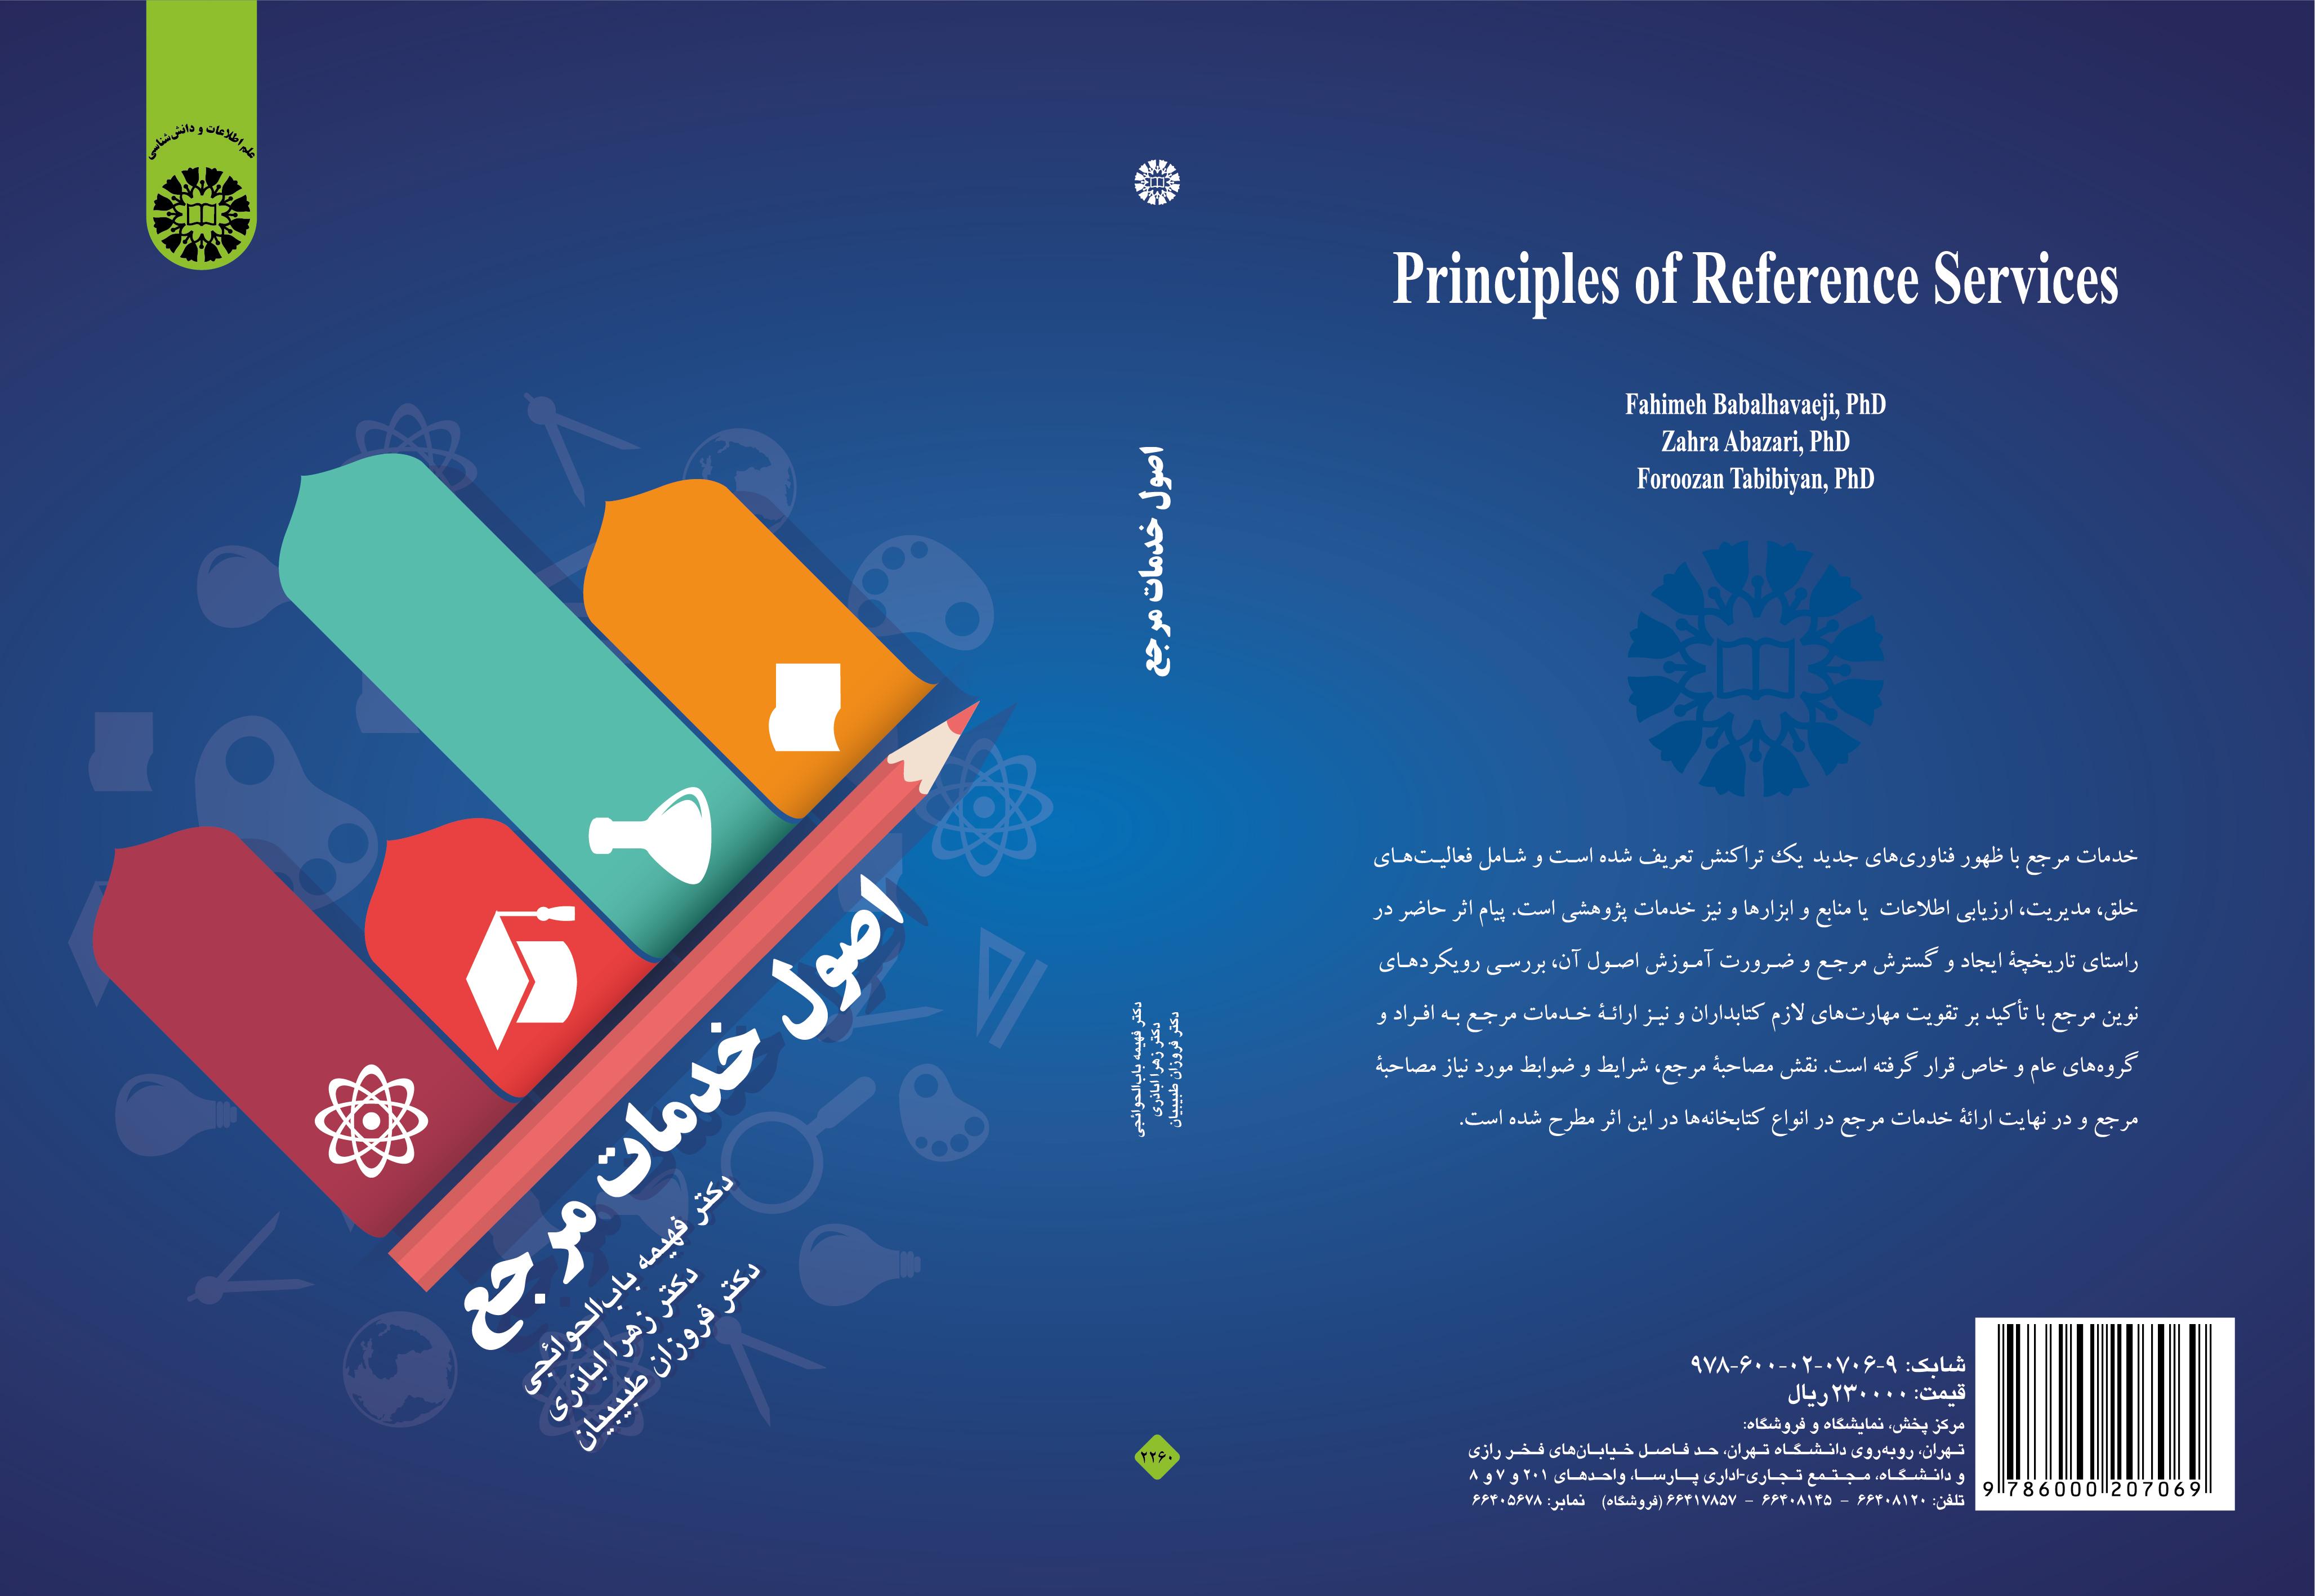 Principles of Reference Services